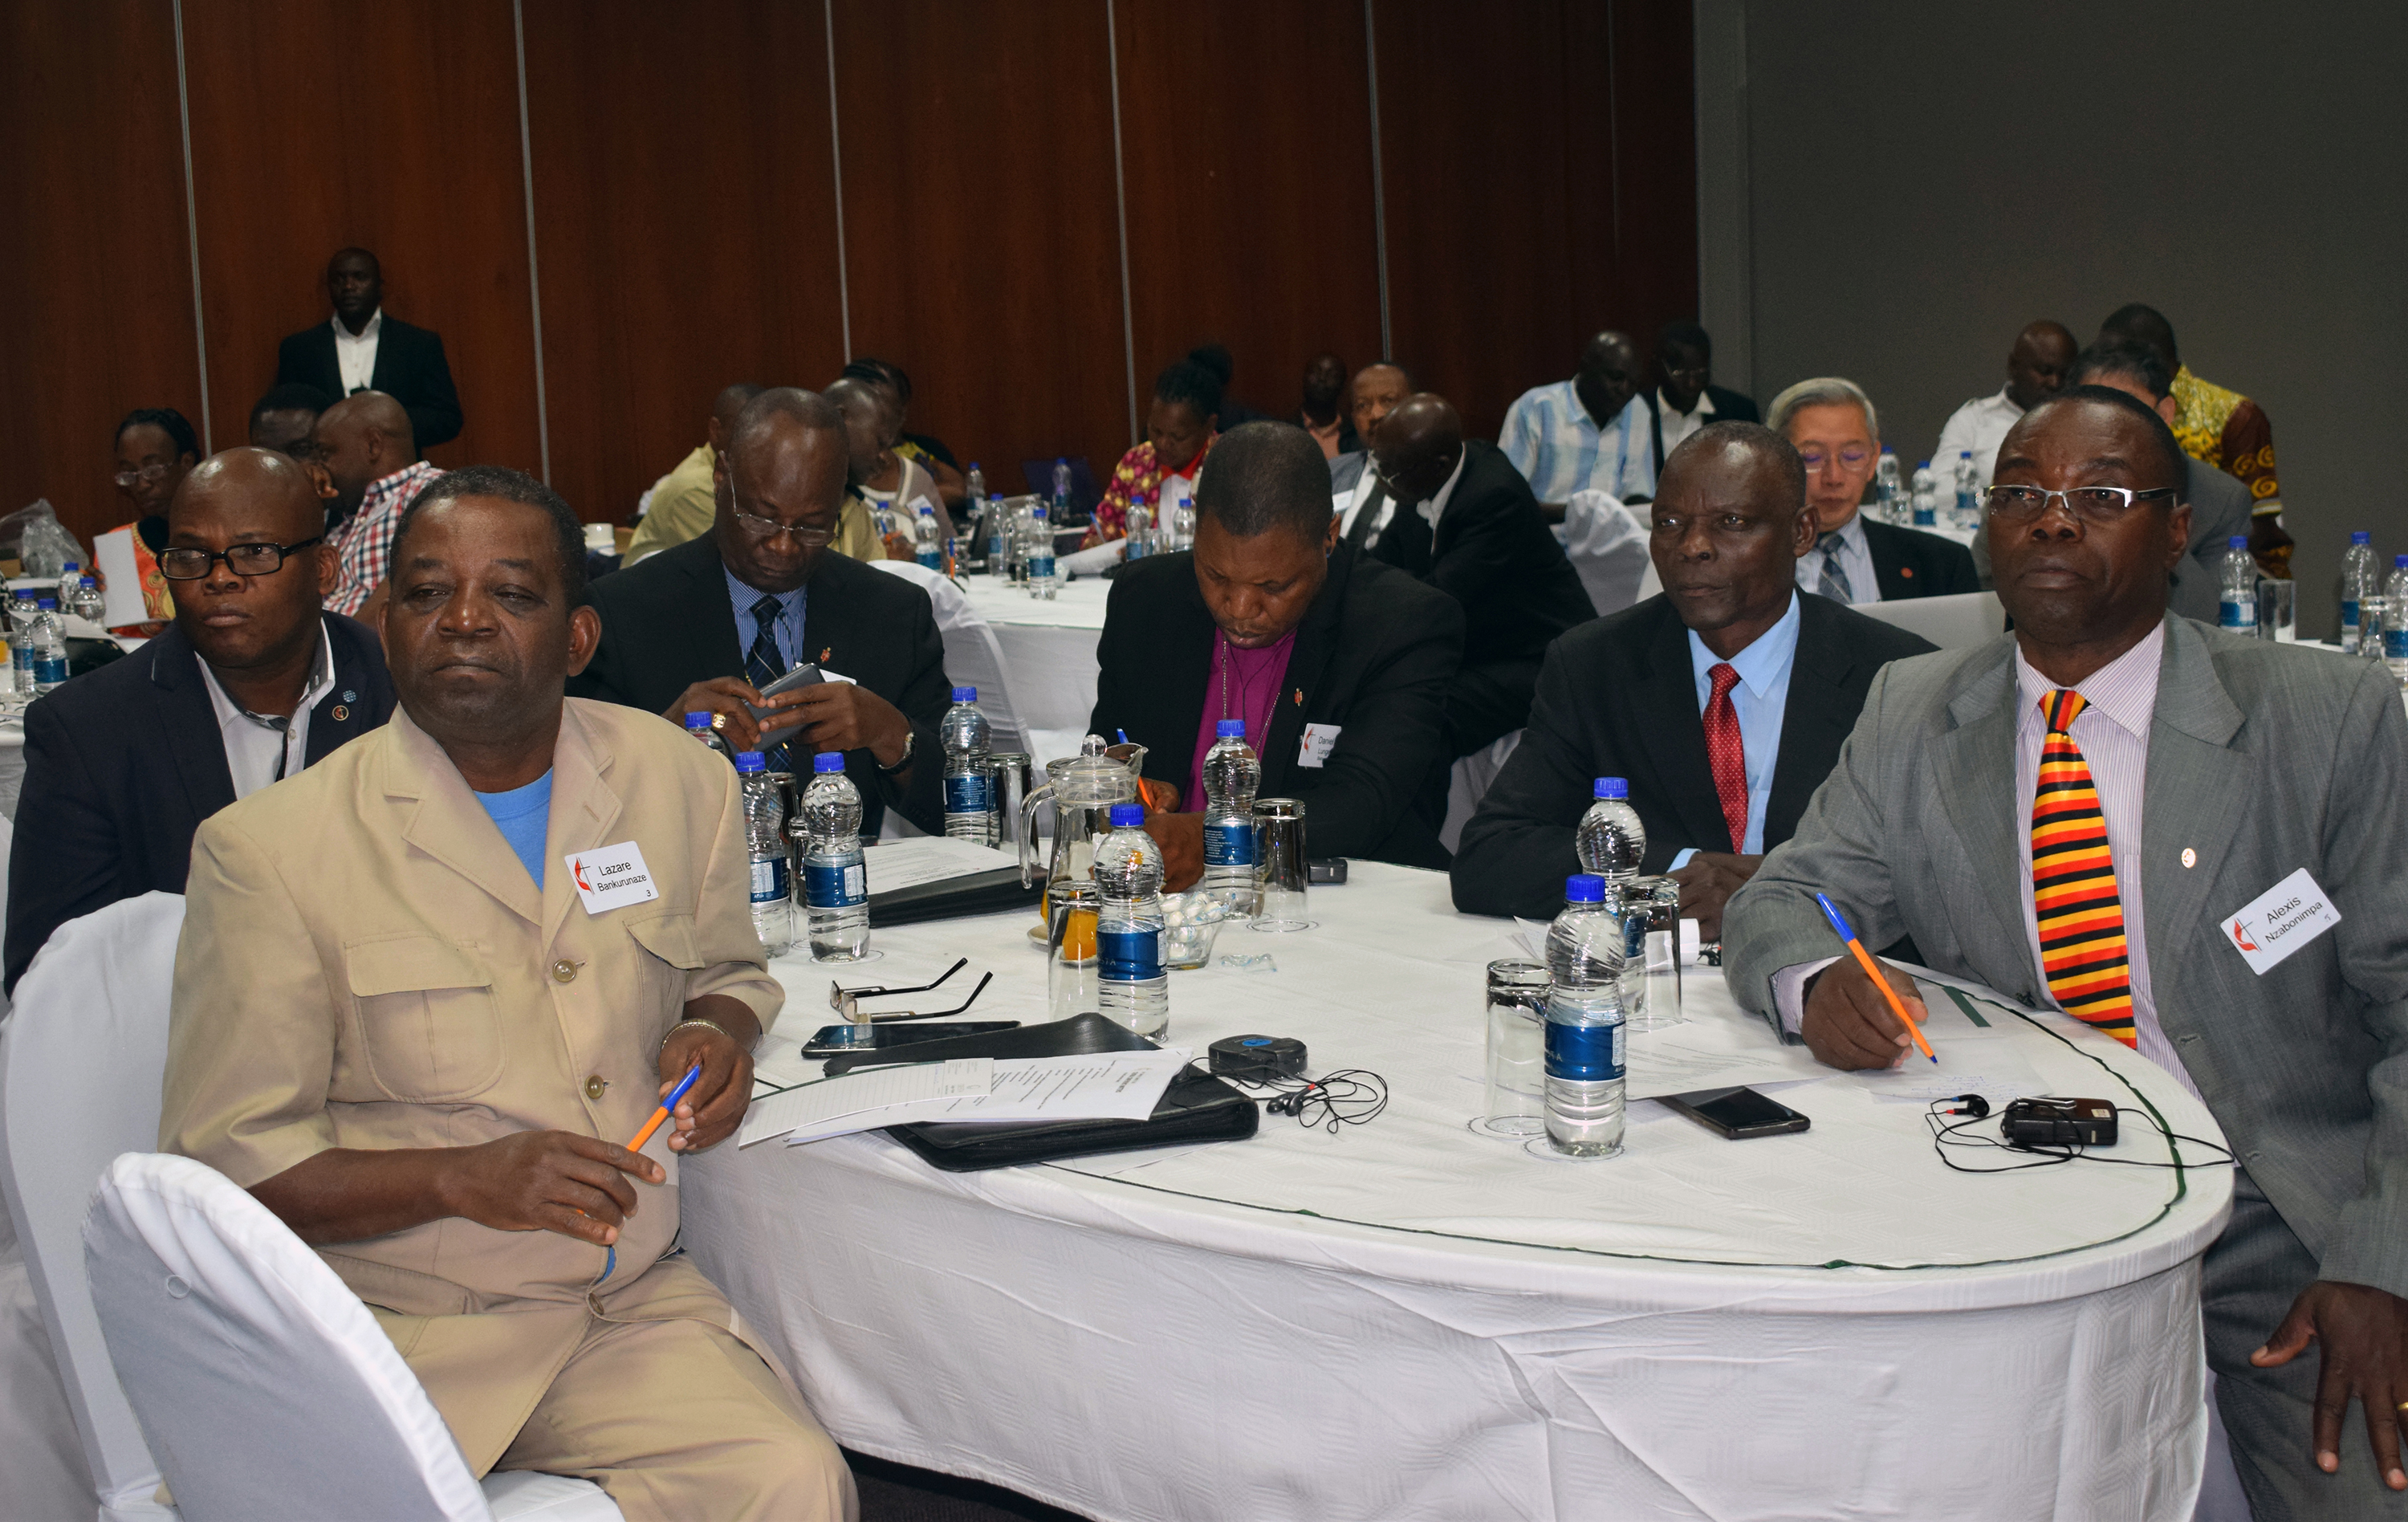  Participants of an initial meeting about the implementation of the 2016 General Conference decision to increase the number of bishops in Africa from 13 to 18, listen to discussions in Harare, Zimbabwe. Photo by Eveline Chikwanah, UMNS.